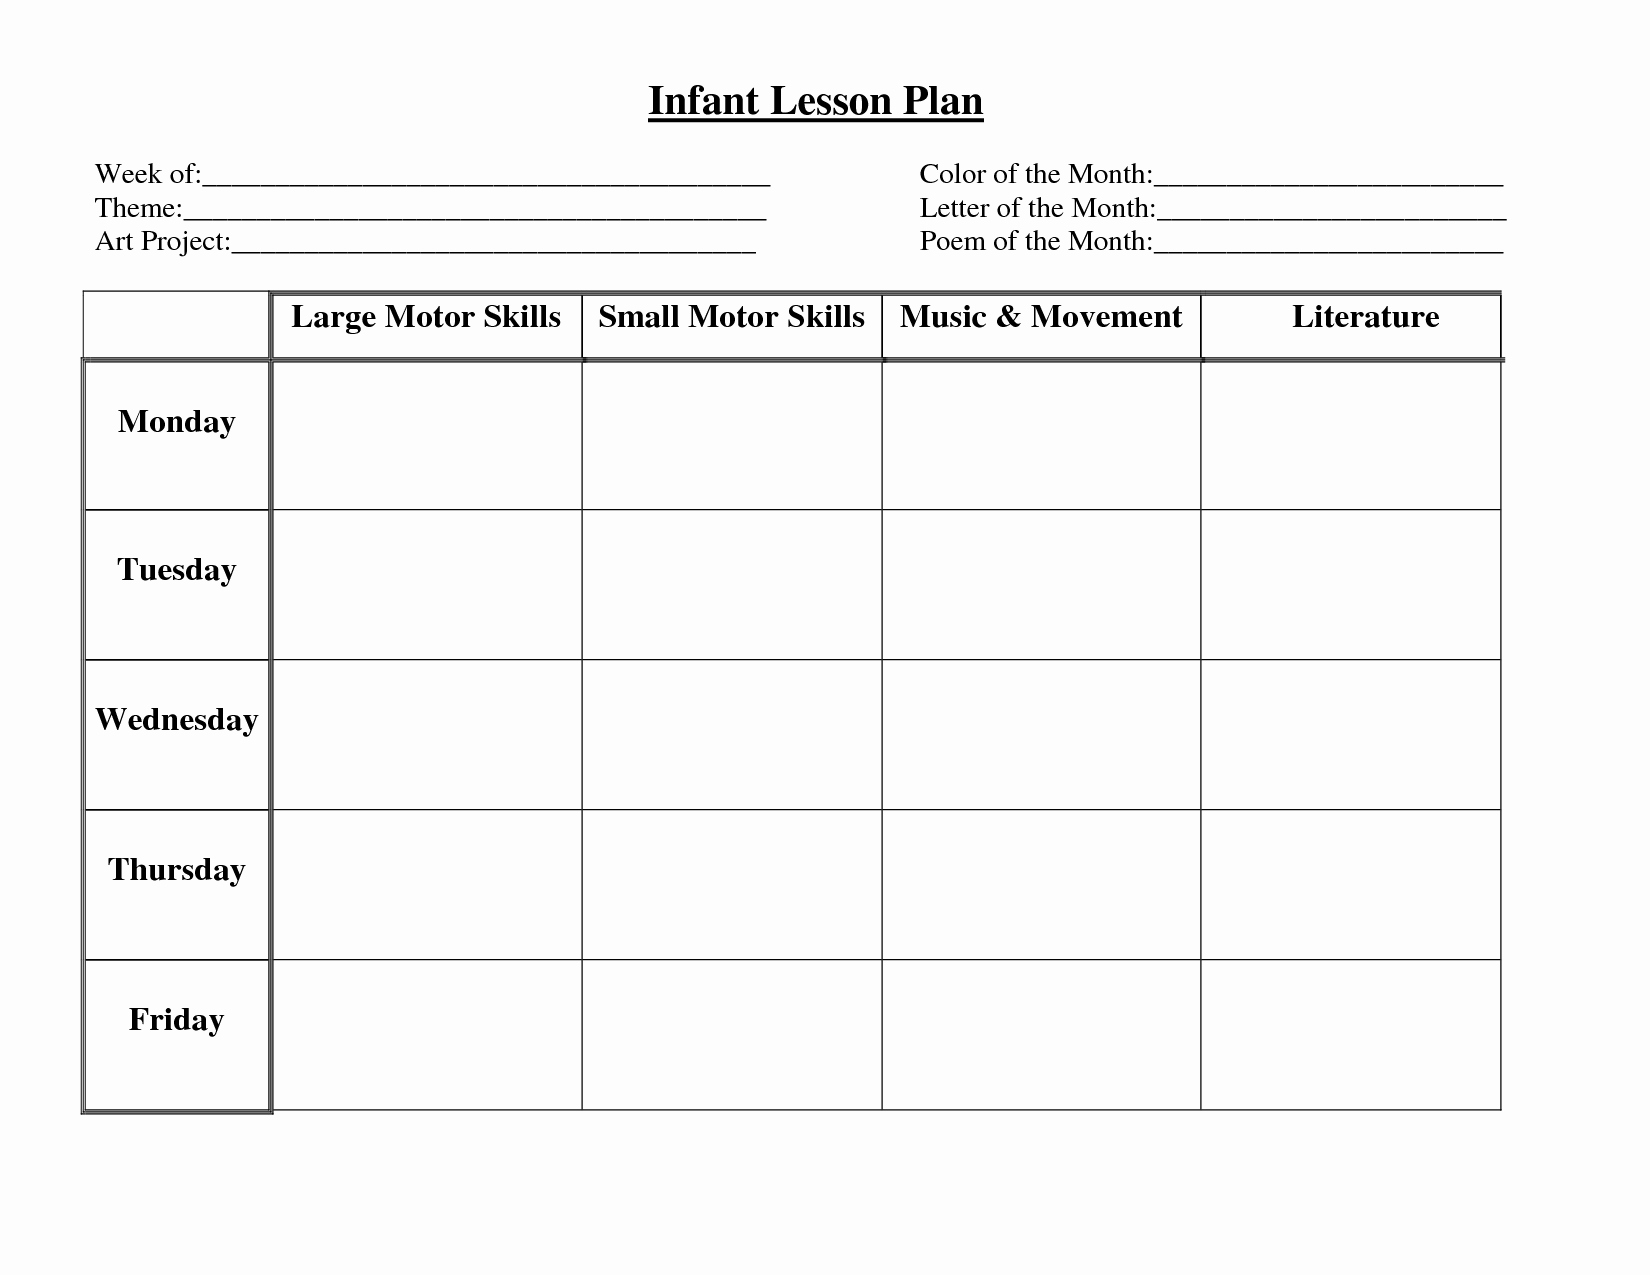 Blank Lesson Plan Template Free Awesome Infant Blank Lesson Plan Sheets